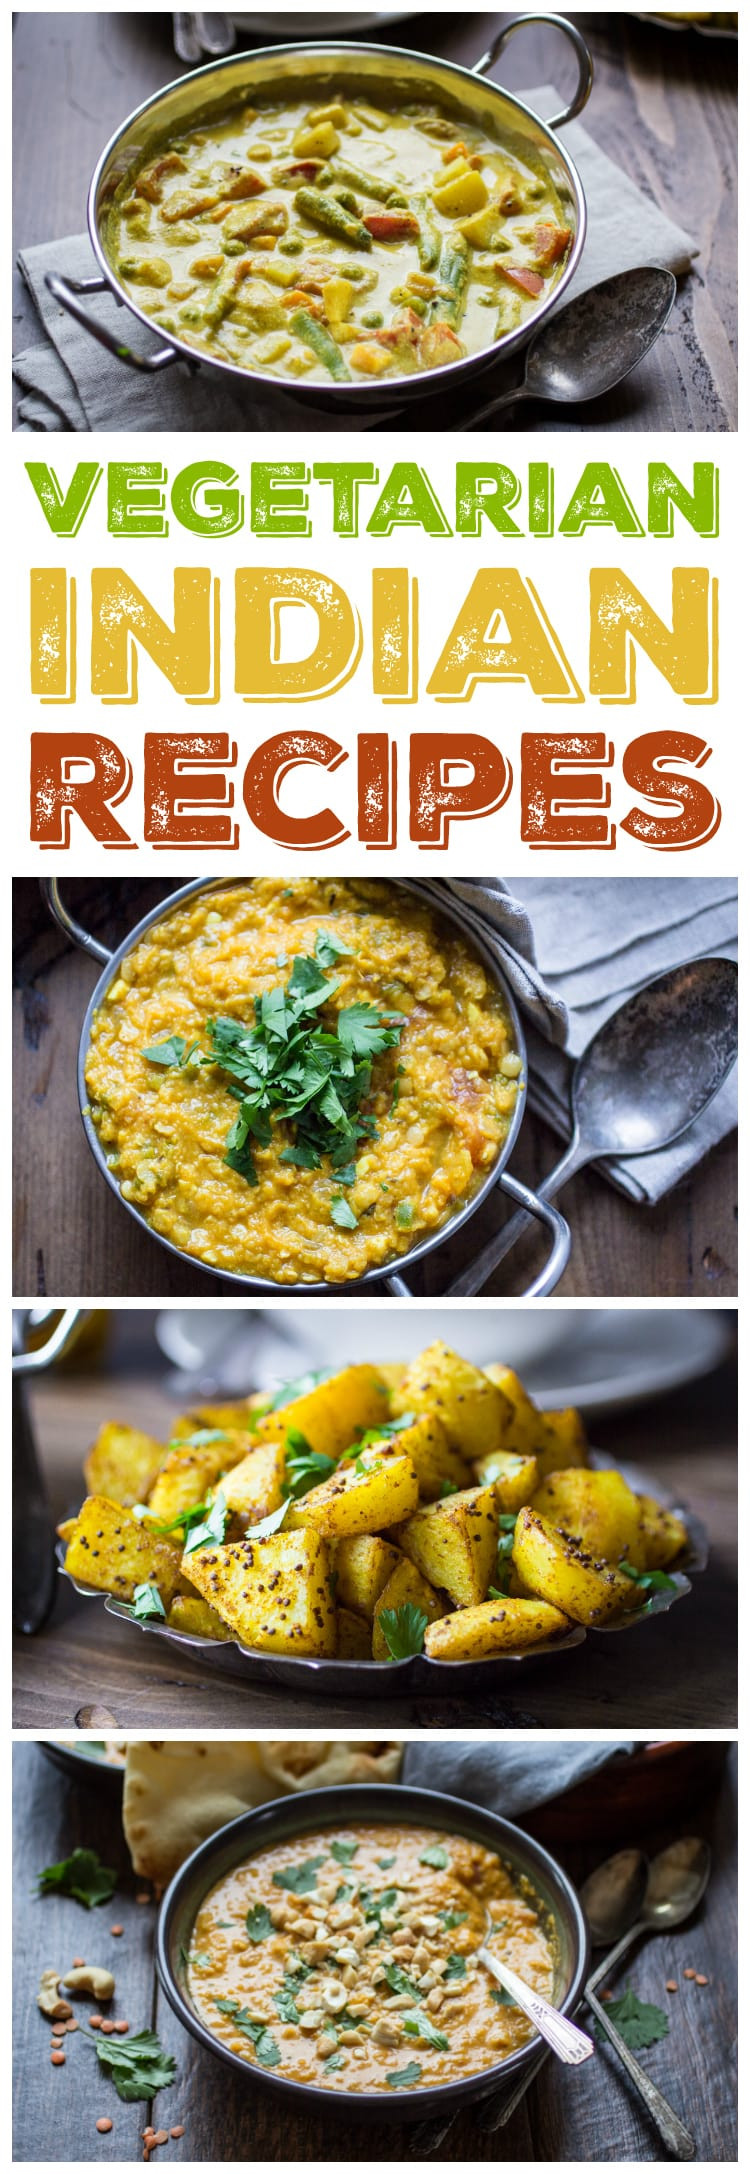 Dinner Recipes Indian Veg
 10 Ve arian Indian Recipes to Make Again and Again The